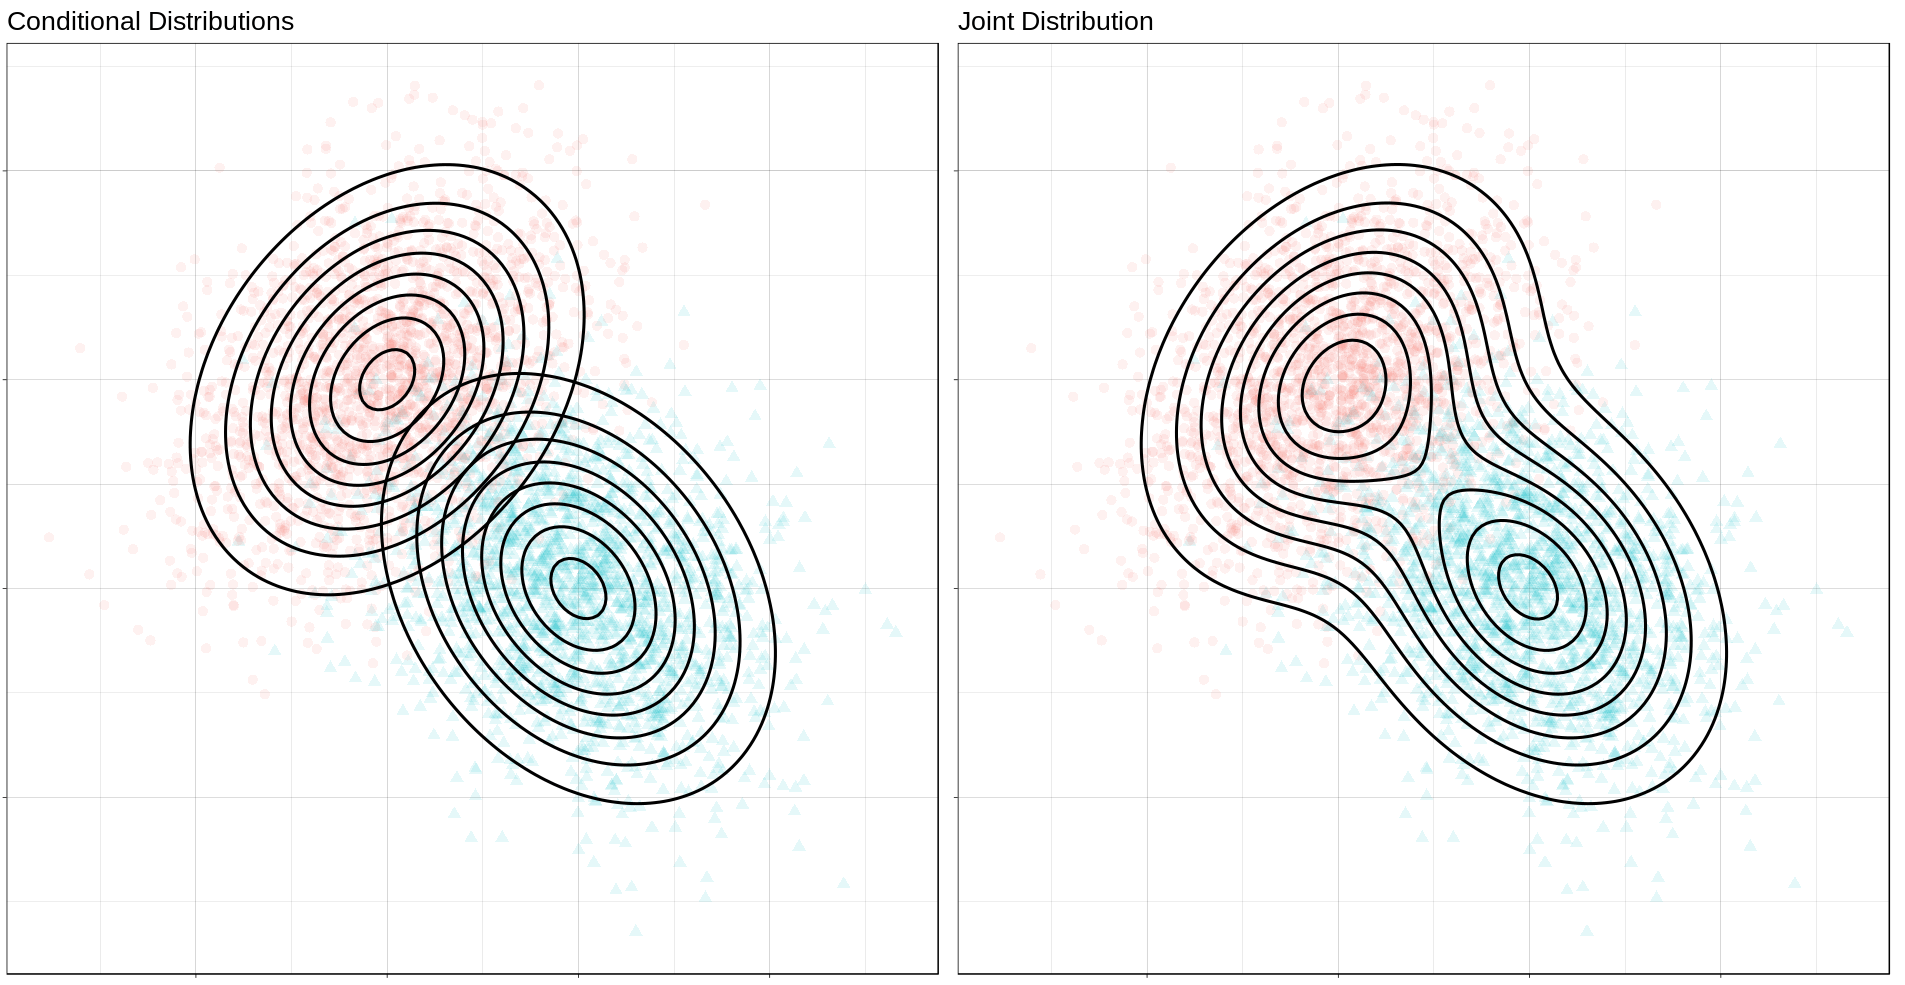 Contours of the feature distributions for each class.